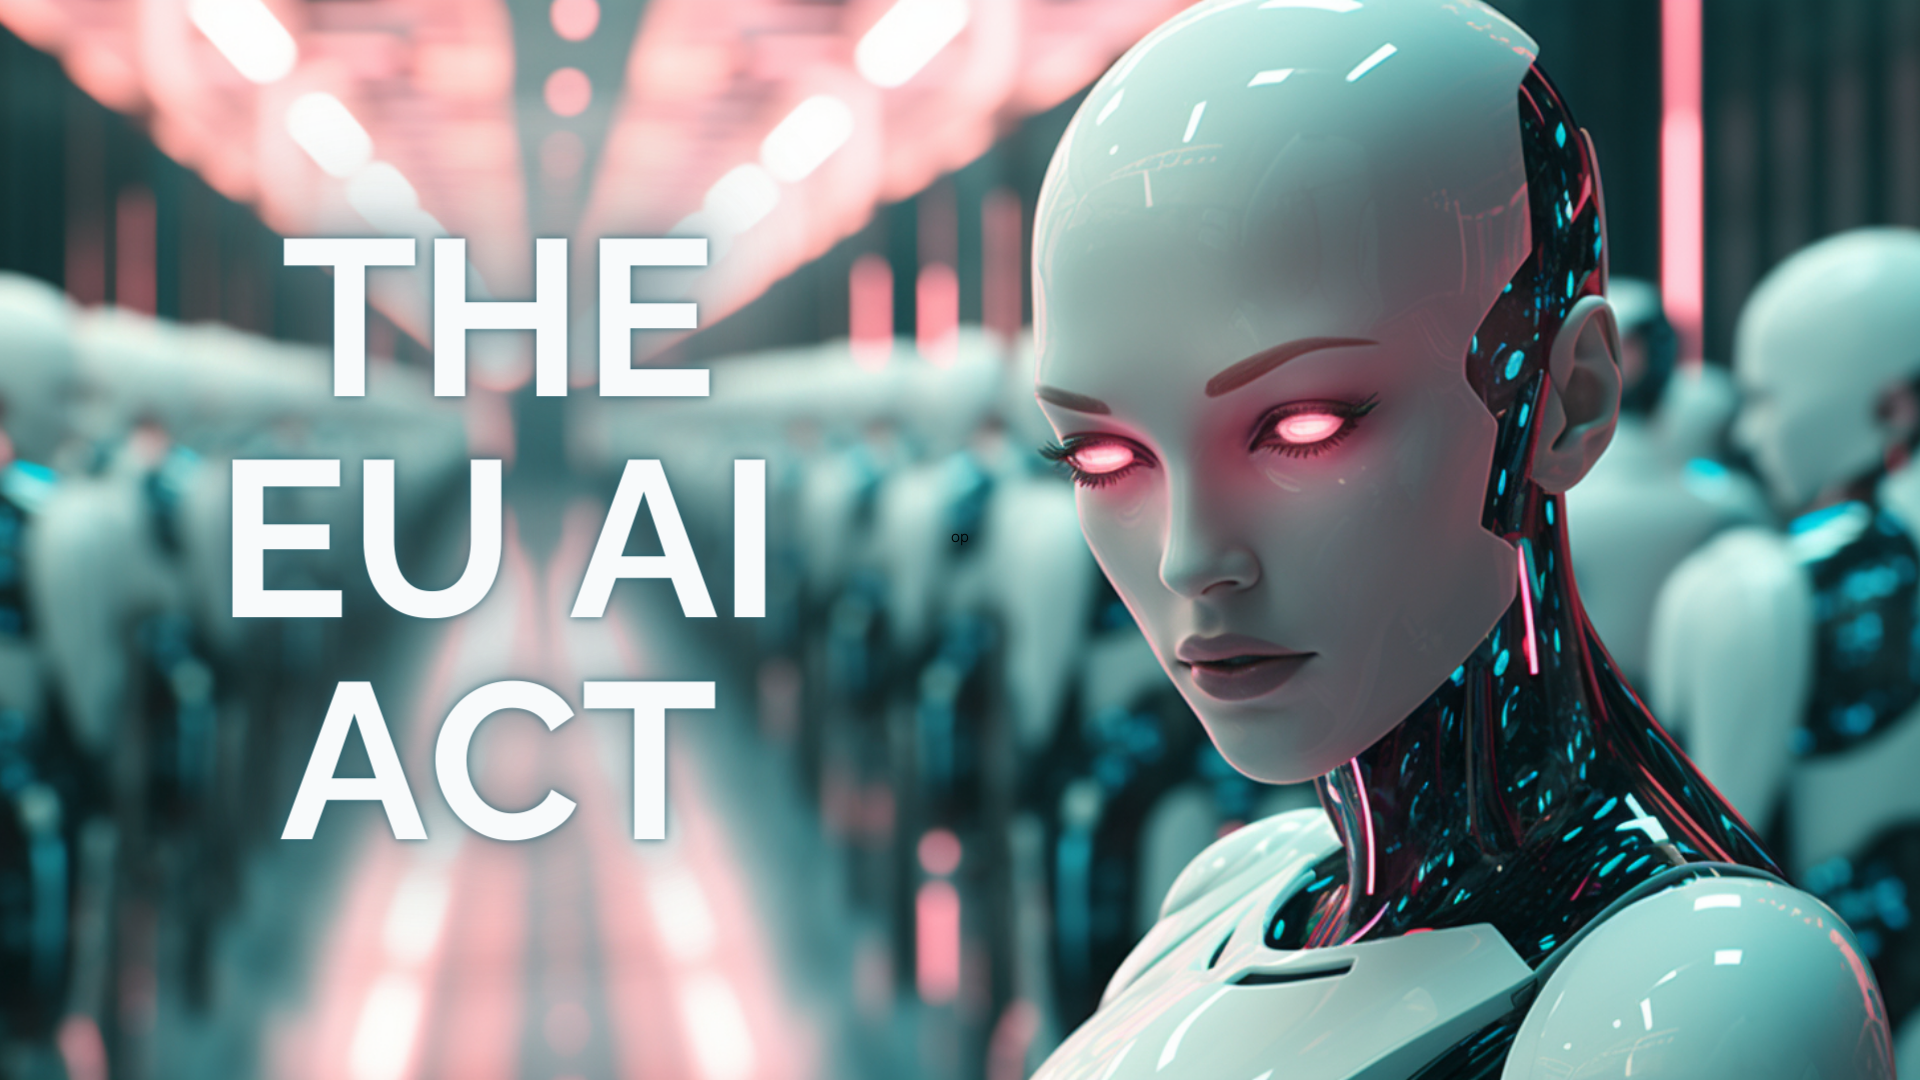 artificial intelligence, teal and pink colors, eu ai act